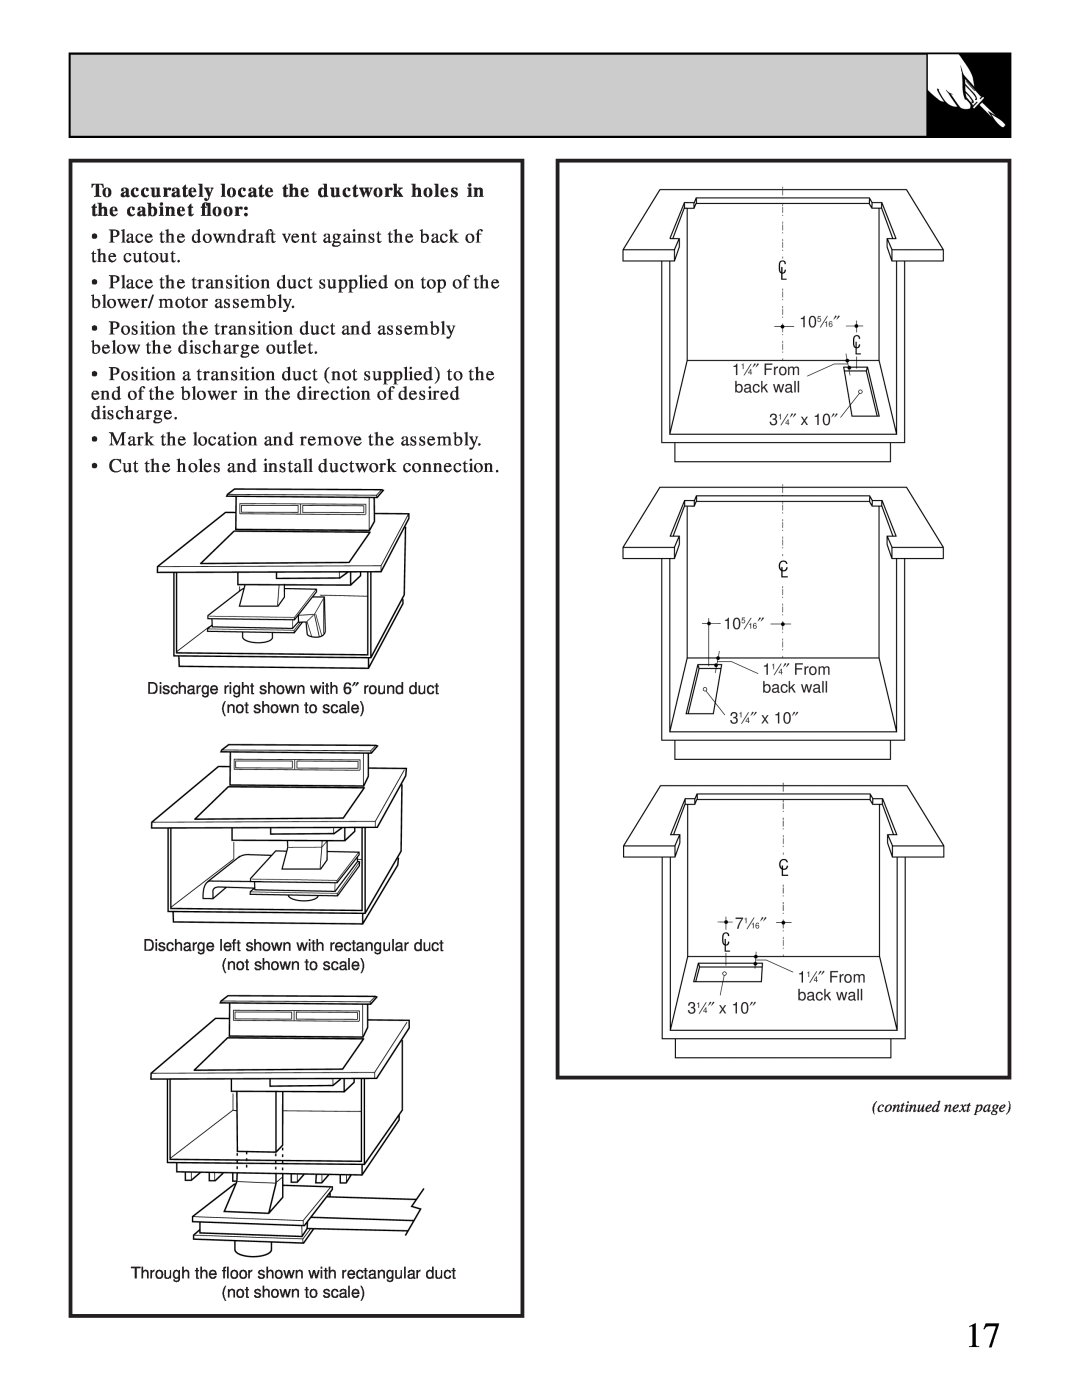 GE Monogram JGP645 operating instructions To accurately locate the ductwork holes in the cabinet floor 